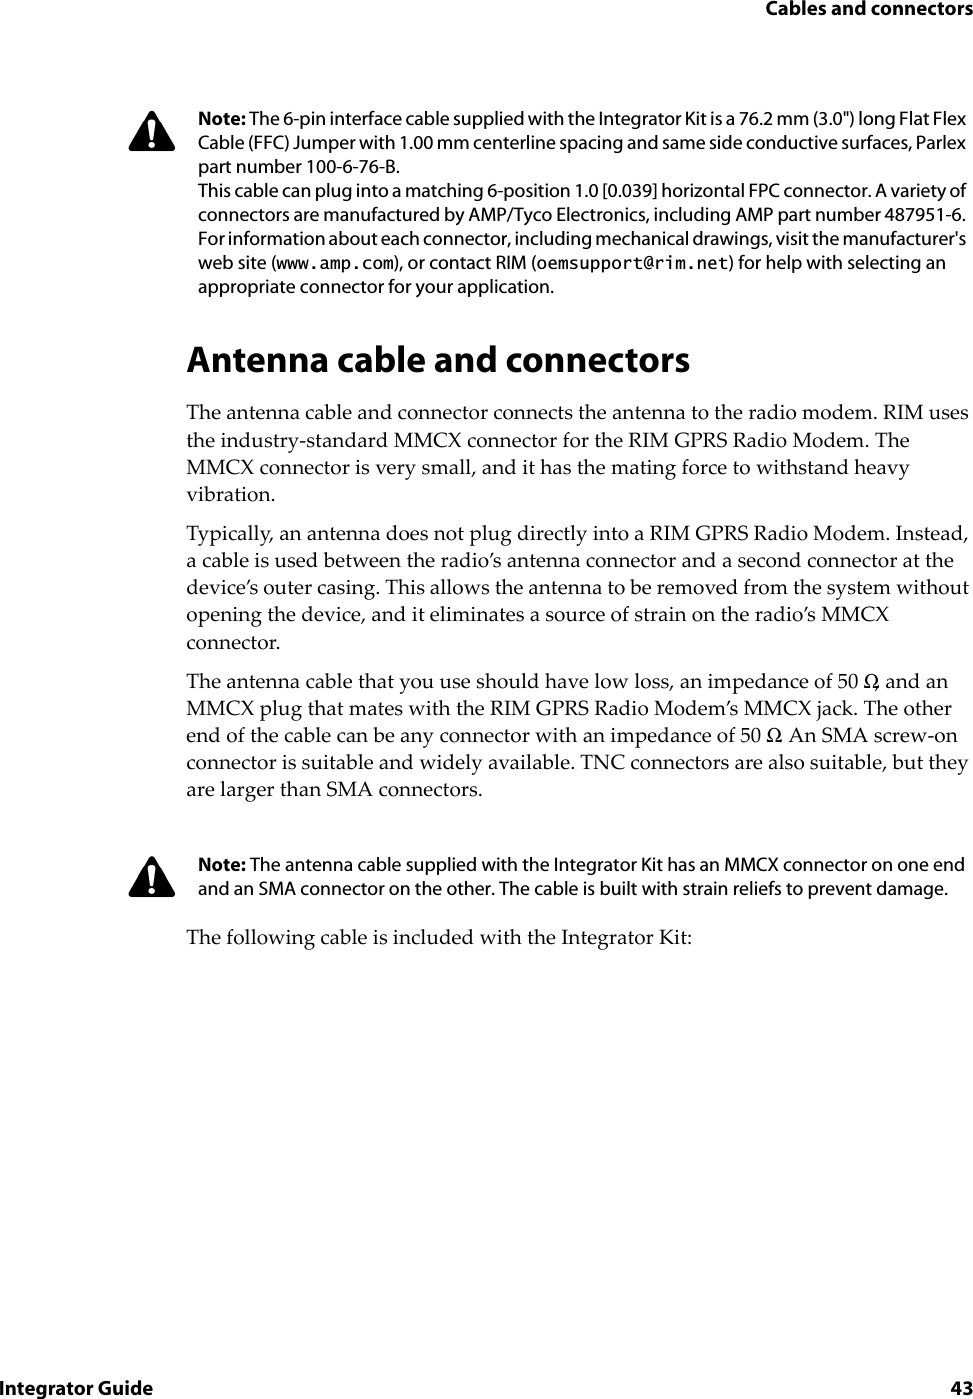 Cables and connectorsIntegrator Guide 43Antenna cable and connectorsThe antenna cable and connector connects the antenna to the radio modem. RIM uses the industry-standard MMCX connector for the RIM GPRS Radio Modem. The MMCX connector is very small, and it has the mating force to withstand heavy vibration.Typically, an antenna does not plug directly into a RIM GPRS Radio Modem. Instead, a cable is used between the radio’s antenna connector and a second connector at the device’s outer casing. This allows the antenna to be removed from the system without opening the device, and it eliminates a source of strain on the radio’s MMCX connector.The antenna cable that you use should have low loss, an impedance of 50 Ω, and an MMCX plug that mates with the RIM GPRS Radio Modem’s MMCX jack. The other end of the cable can be any connector with an impedance of 50 Ω. An SMA screw-on connector is suitable and widely available. TNC connectors are also suitable, but they are larger than SMA connectors.The following cable is included with the Integrator Kit:Note: The 6-pin interface cable supplied with the Integrator Kit is a 76.2 mm (3.0&quot;) long Flat Flex Cable (FFC) Jumper with 1.00 mm centerline spacing and same side conductive surfaces, Parlex part number 100-6-76-B.This cable can plug into a matching 6-position 1.0 [0.039] horizontal FPC connector. A variety of connectors are manufactured by AMP/Tyco Electronics, including AMP part number 487951-6. For information about each connector, including mechanical drawings, visit the manufacturer&apos;s web site (www.amp.com), or contact RIM (oemsupport@rim.net) for help with selecting an appropriate connector for your application.Note: The antenna cable supplied with the Integrator Kit has an MMCX connector on one end and an SMA connector on the other. The cable is built with strain reliefs to prevent damage.